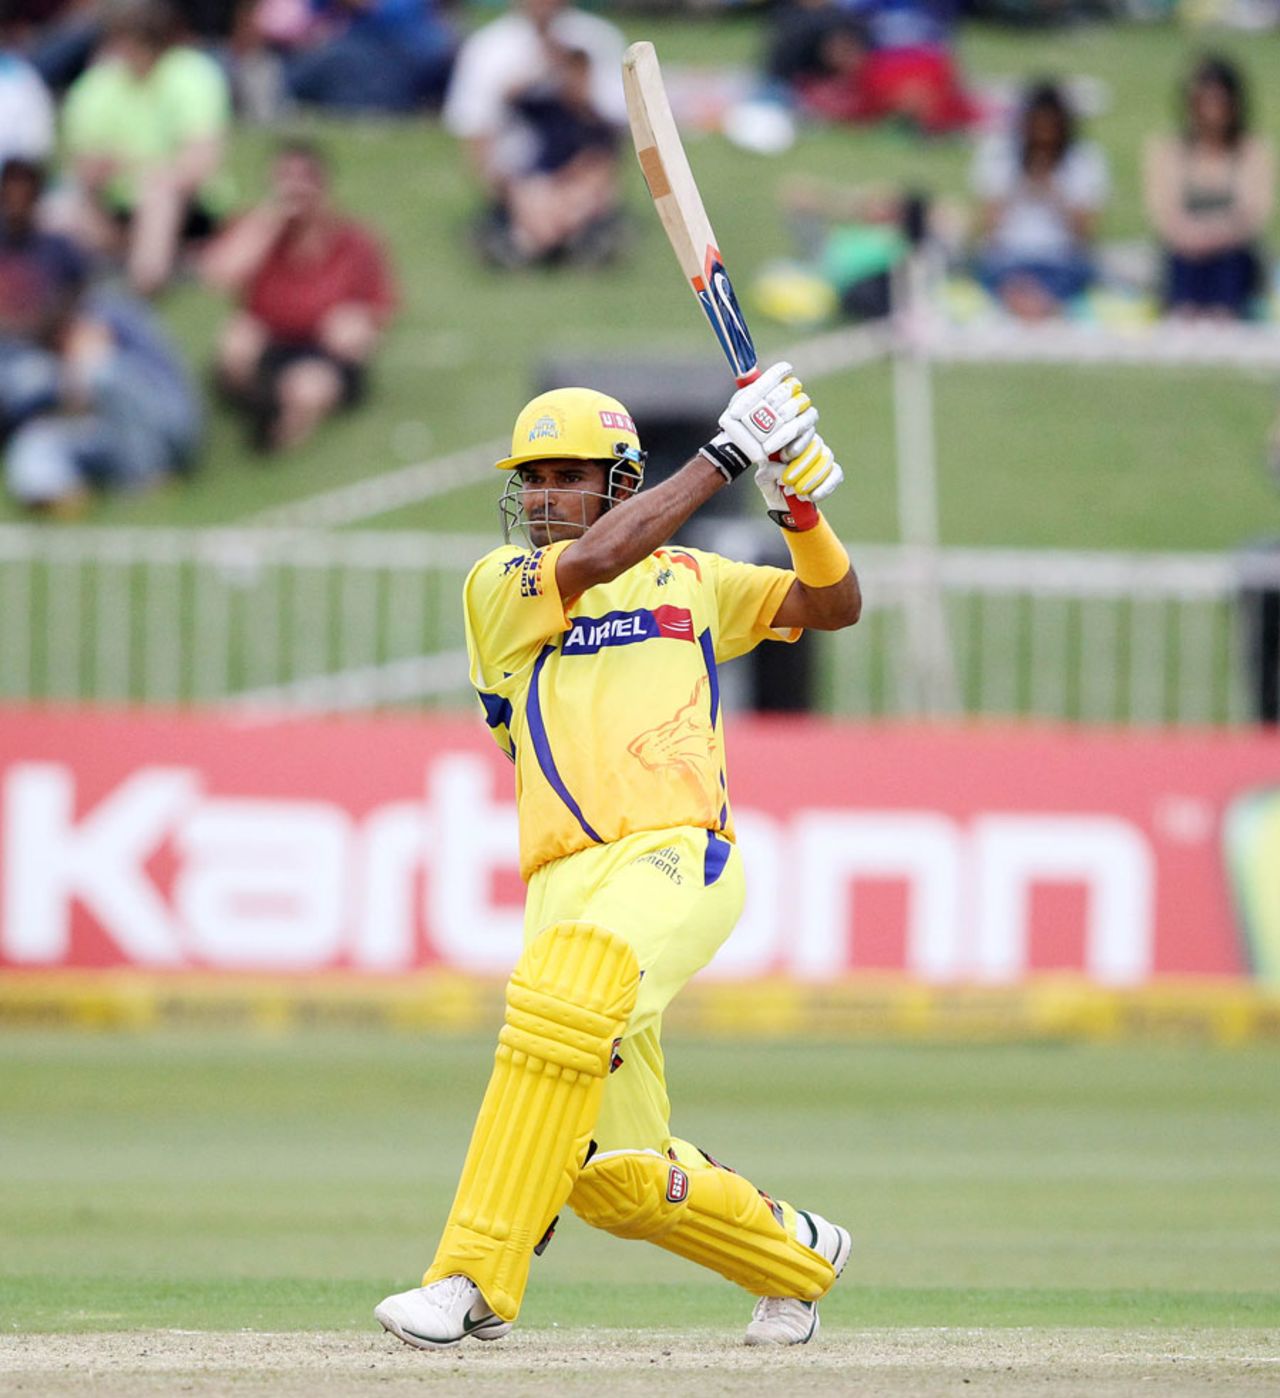 S Badrinath was named Man of the Match for his 47, Chennai Super Kings v Yorkshire, Champions League T20, Durban, October 22, 2012